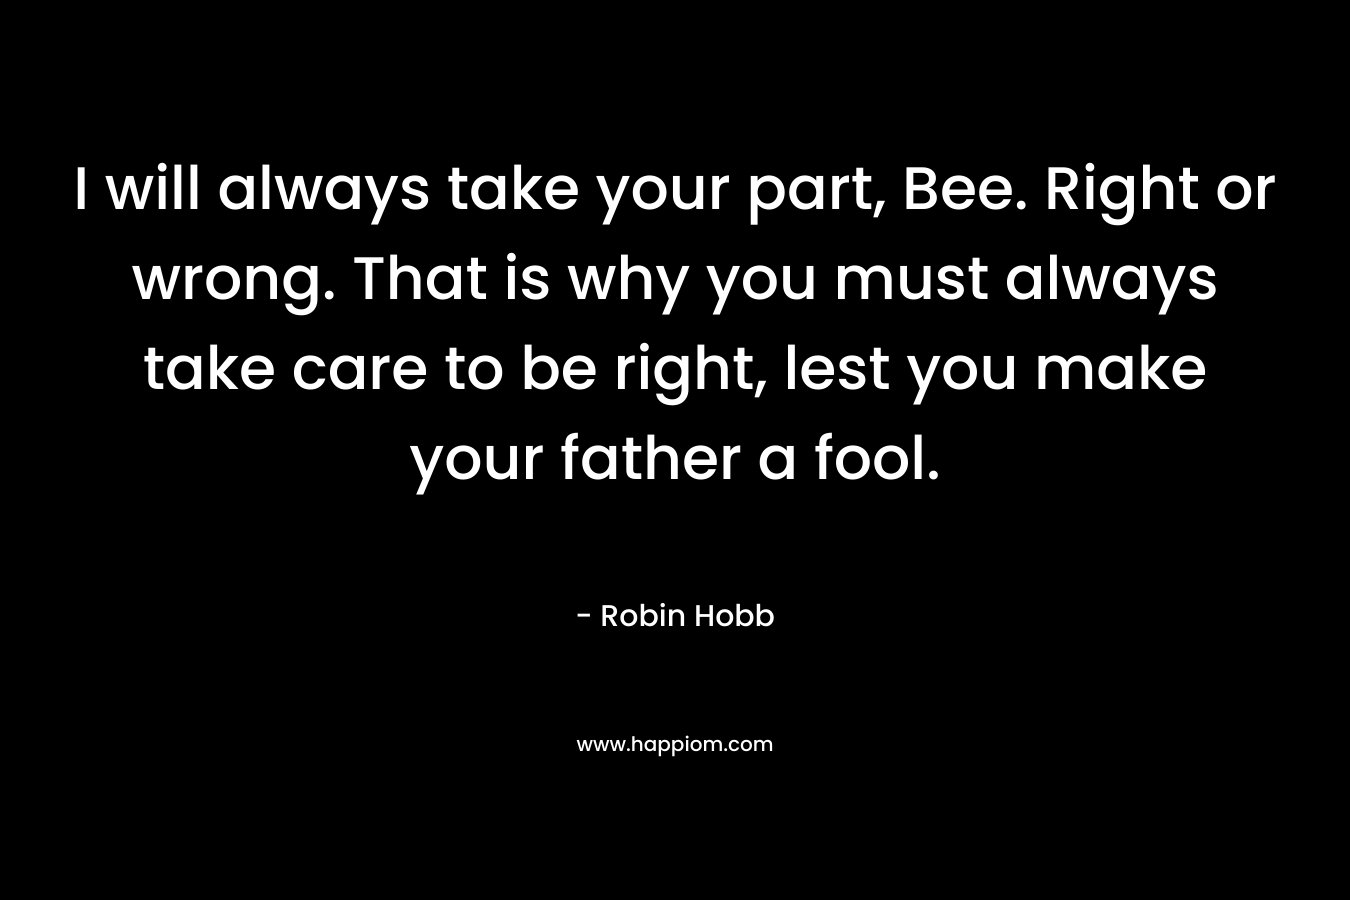 I will always take your part, Bee. Right or wrong. That is why you must always take care to be right, lest you make your father a fool. – Robin Hobb